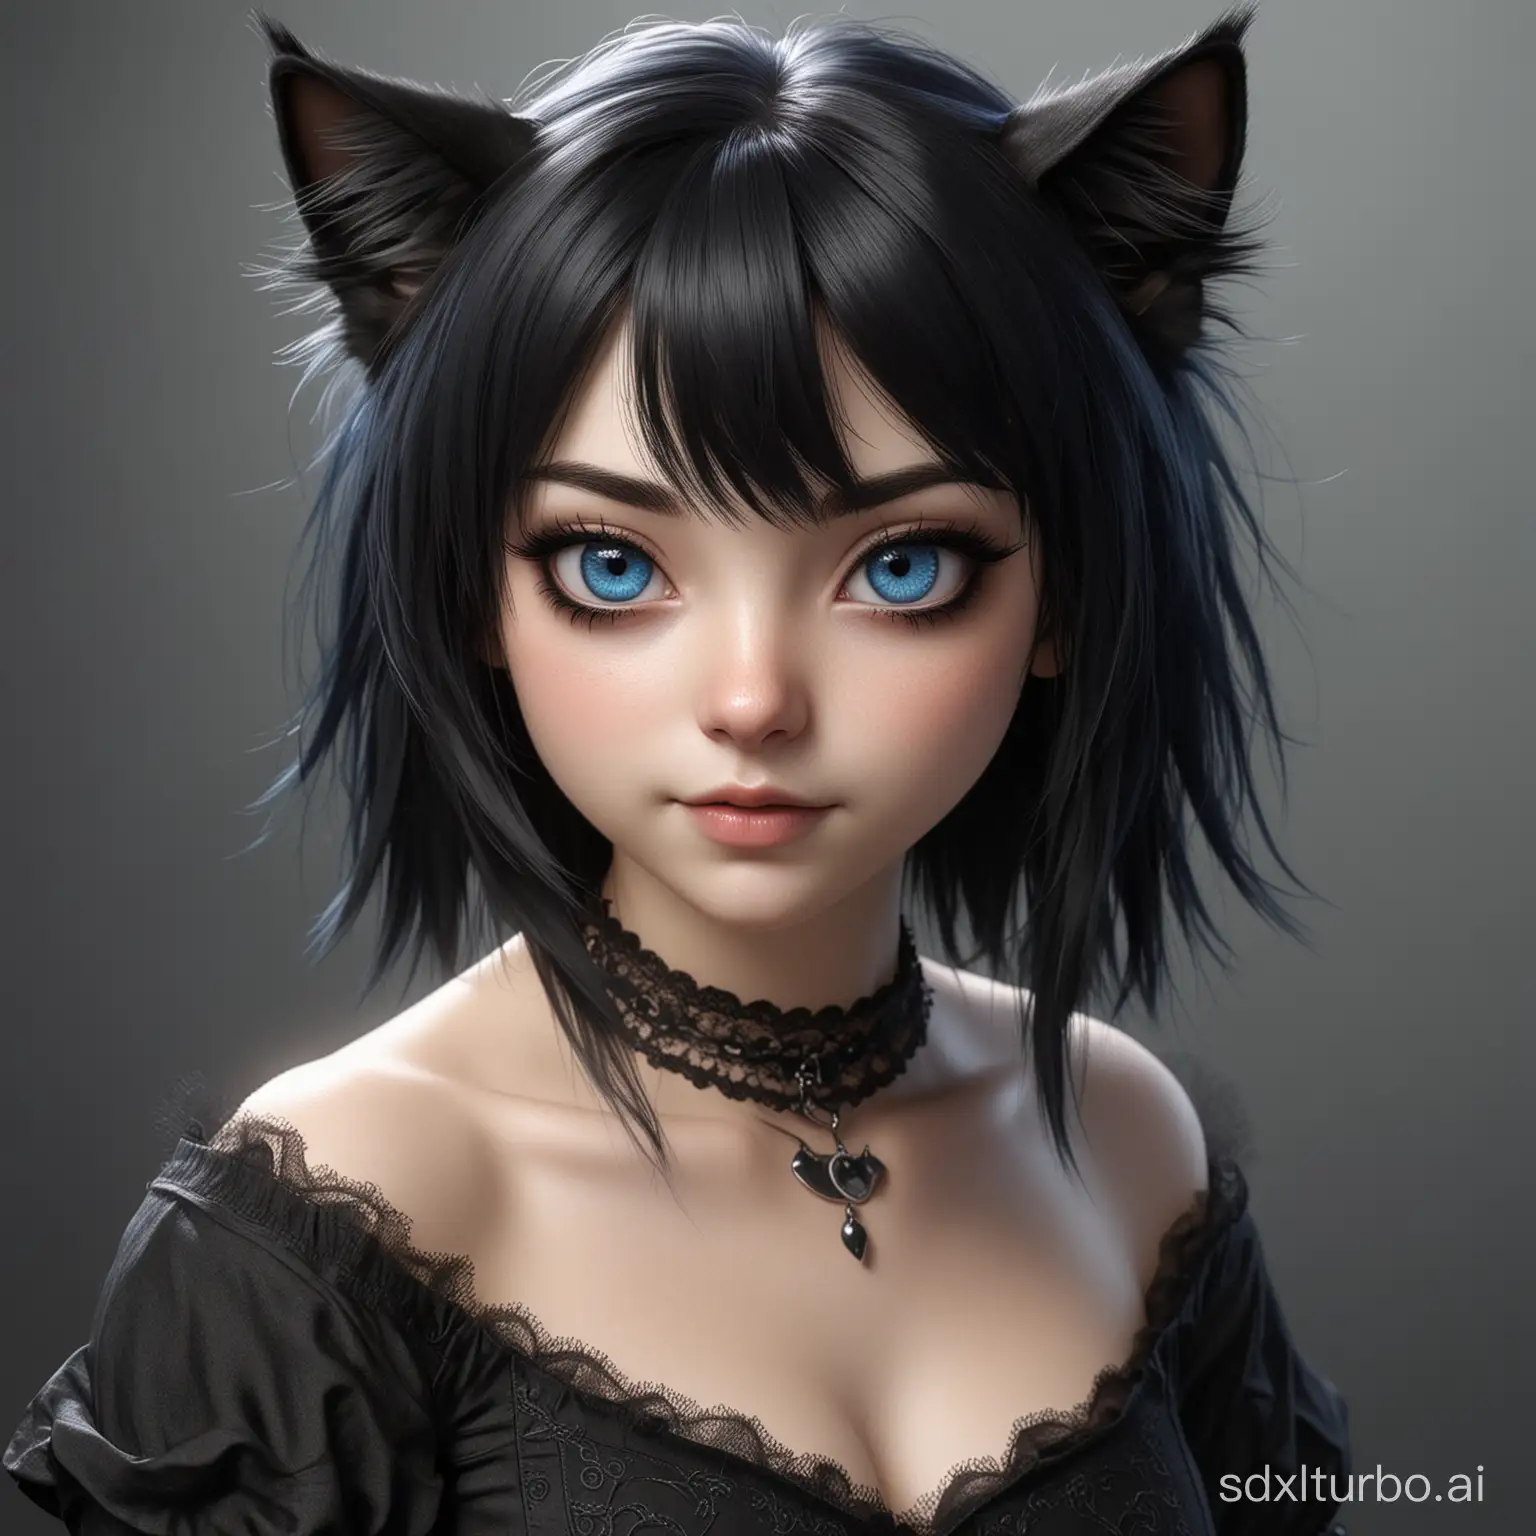 Realistic-Gothic-CatGirl-Portrait-with-Black-Hair-and-Blue-Eyes